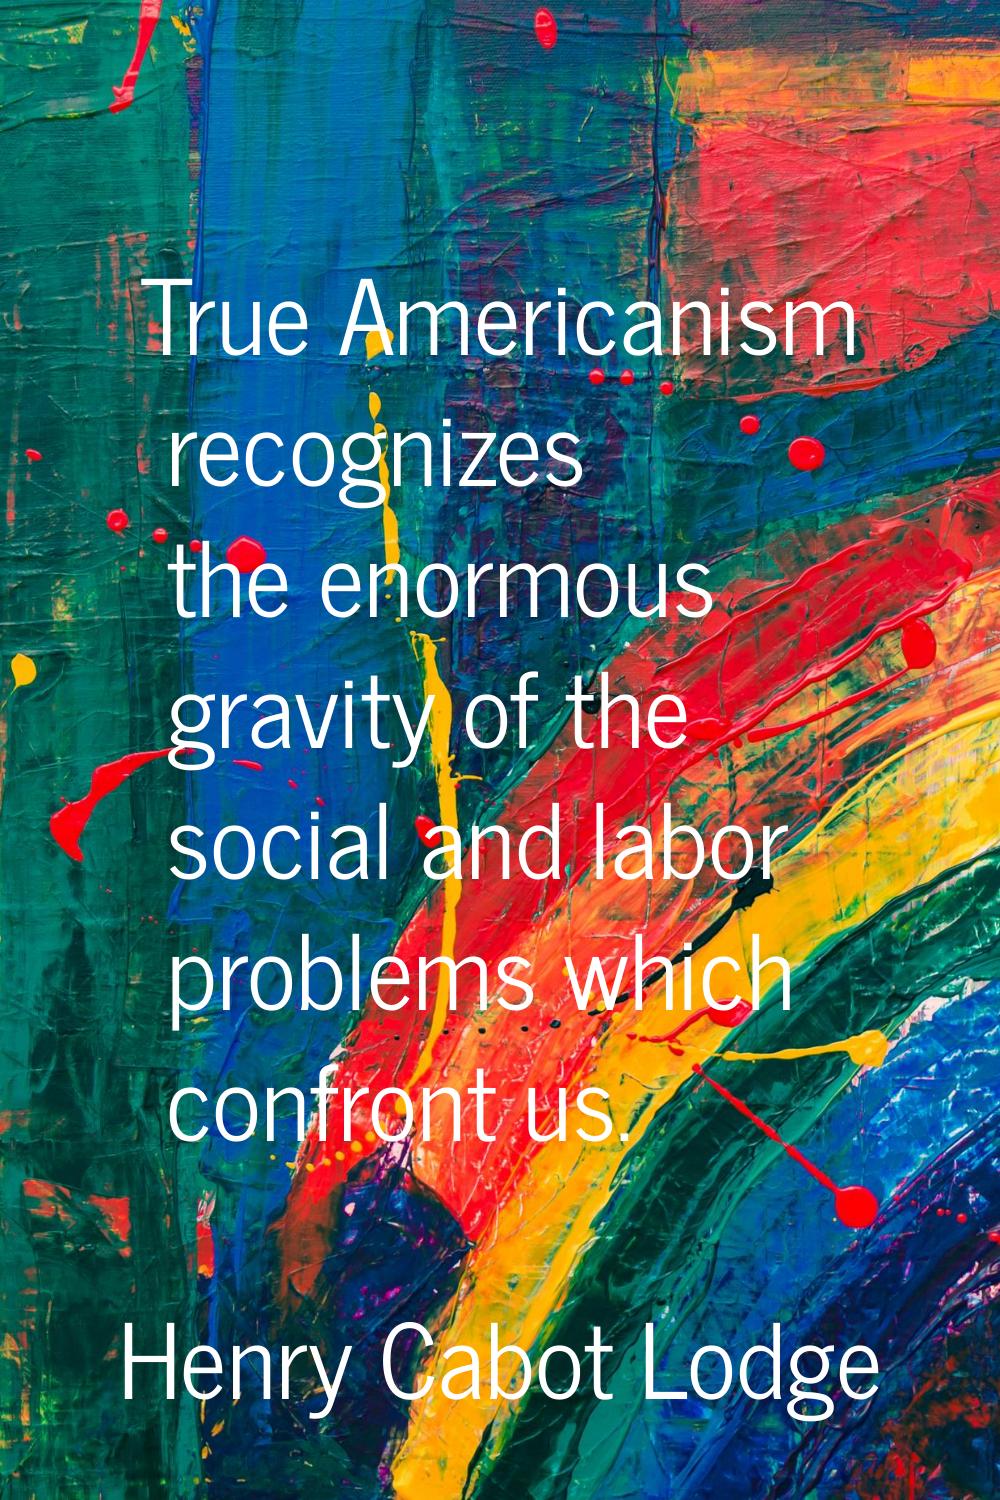 True Americanism recognizes the enormous gravity of the social and labor problems which confront us